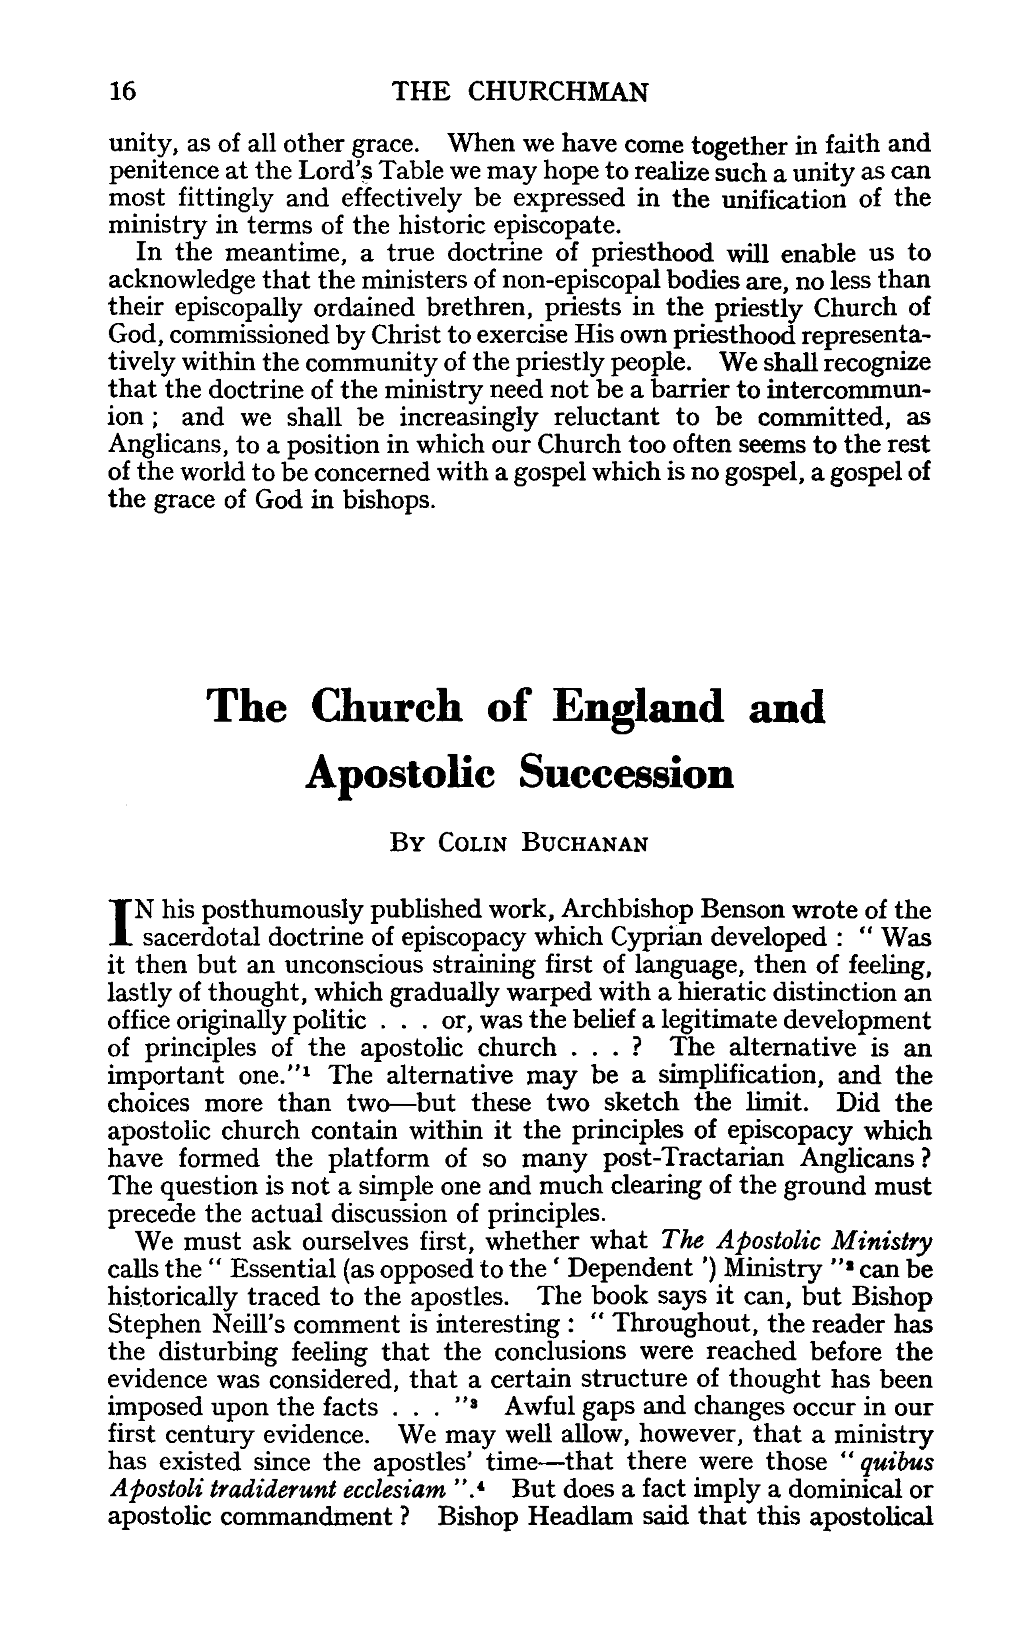 The Church of England and Apostolic Succession